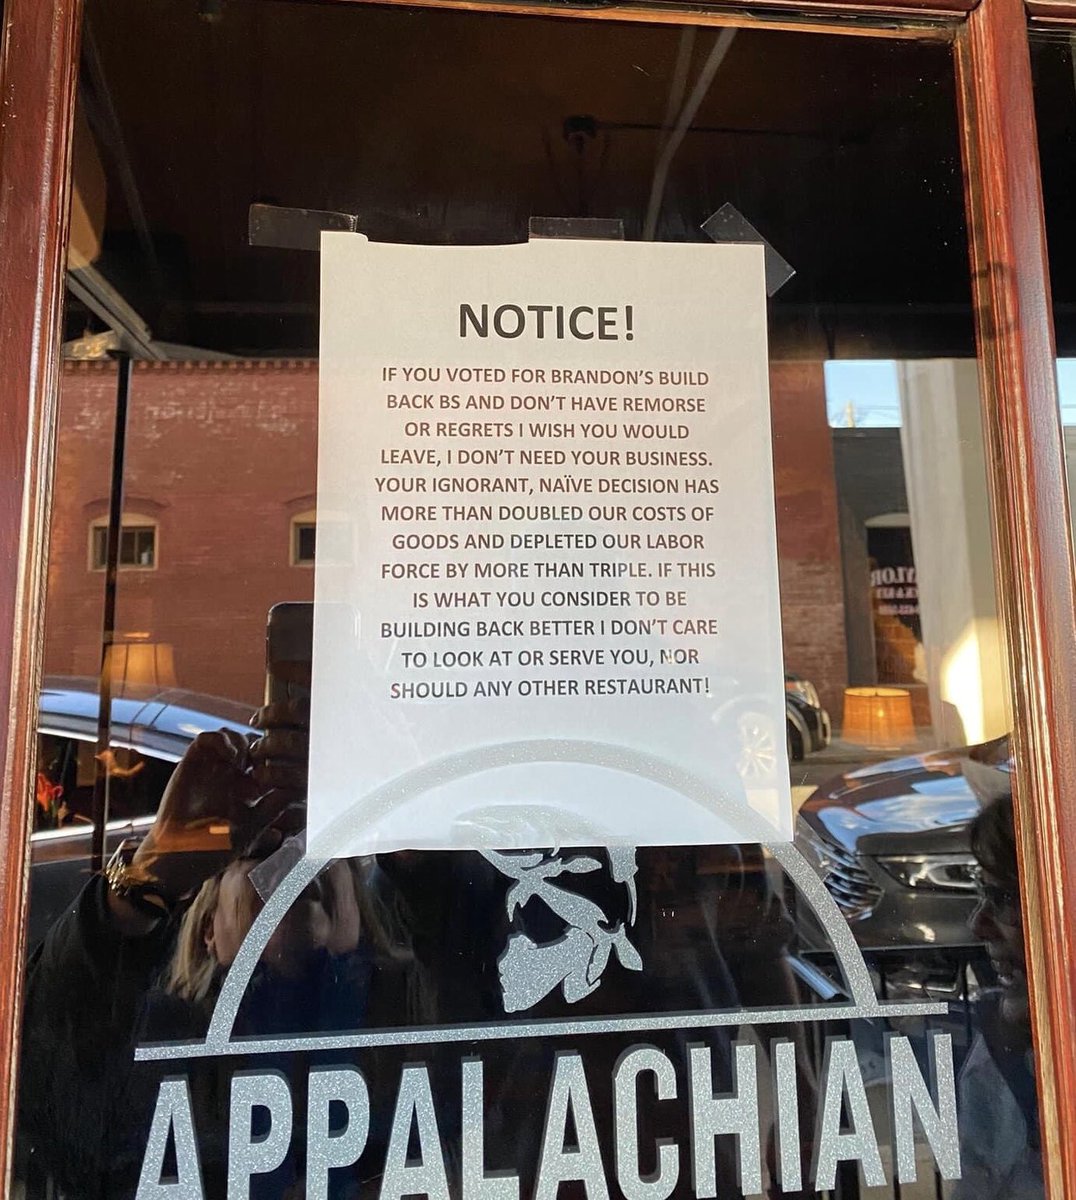 Appalachian Grill in Cartersville, Georgia basically says if you support Joe Biden they don't want to serve you.